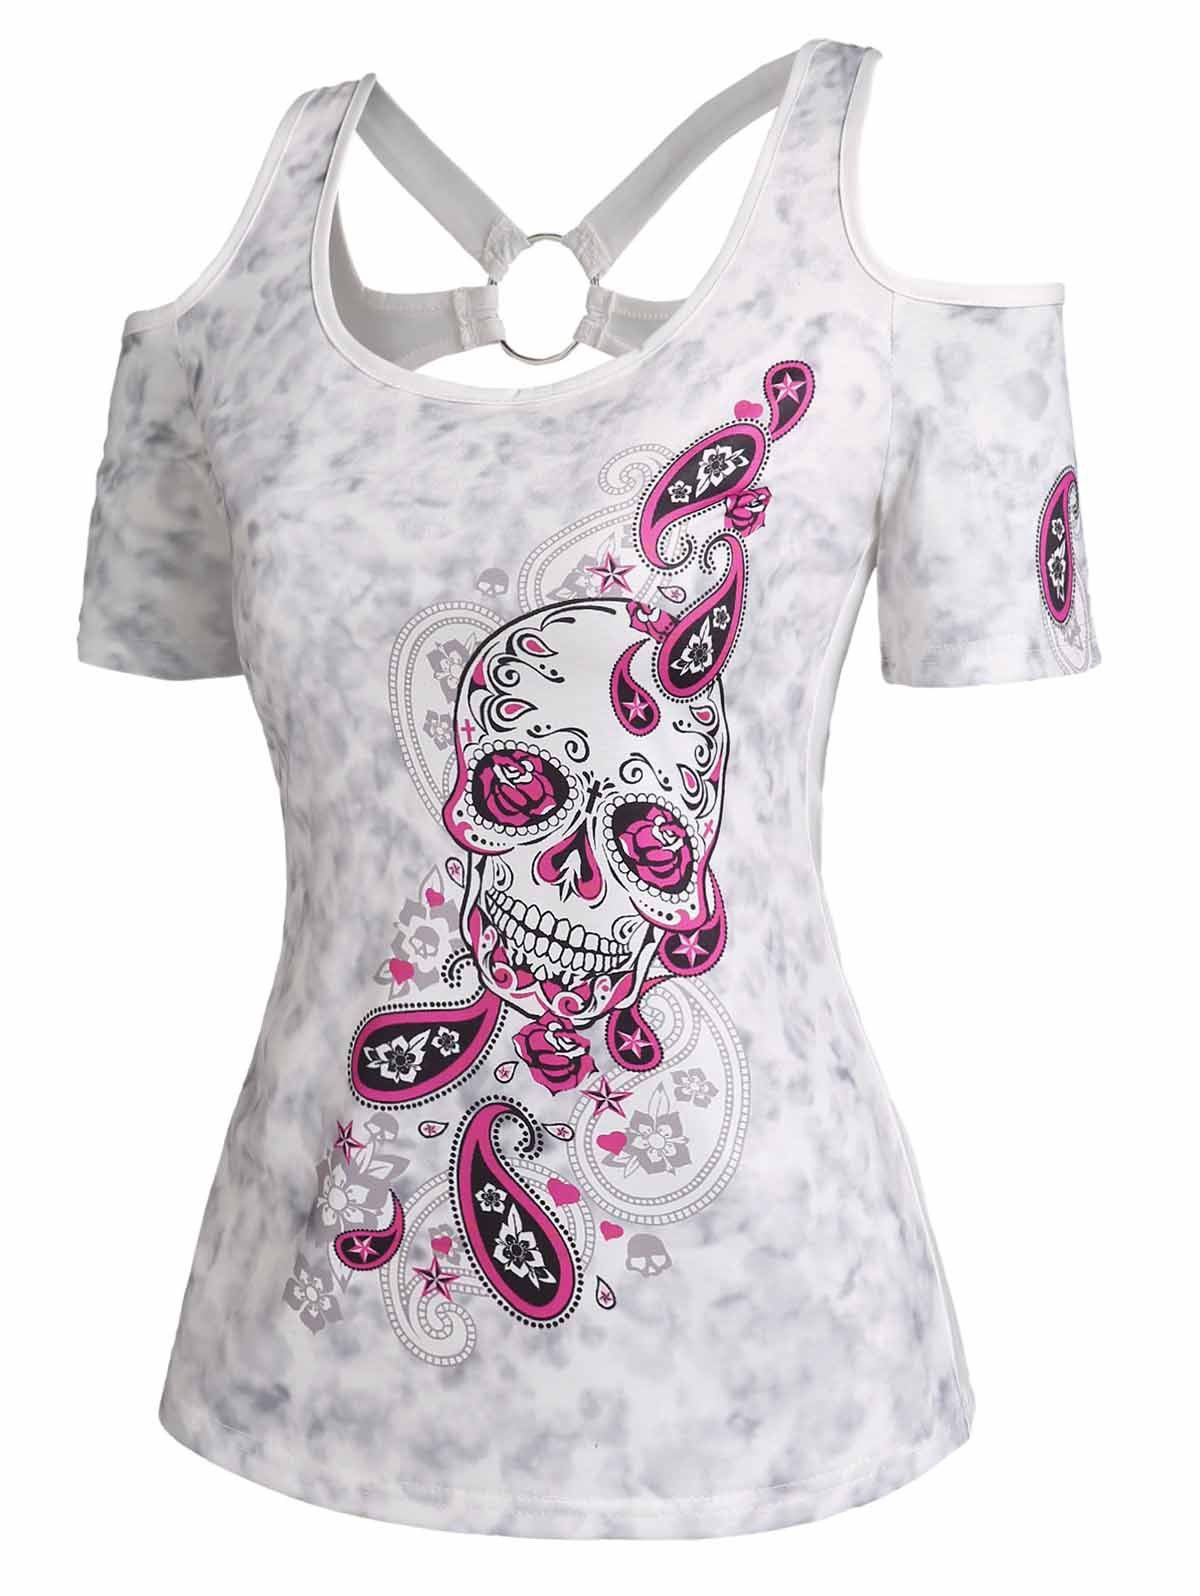 Floral Paisley Skull Print Tie Dye Cold Shoulder O Ring Short Sleeve Tee - WHITE L